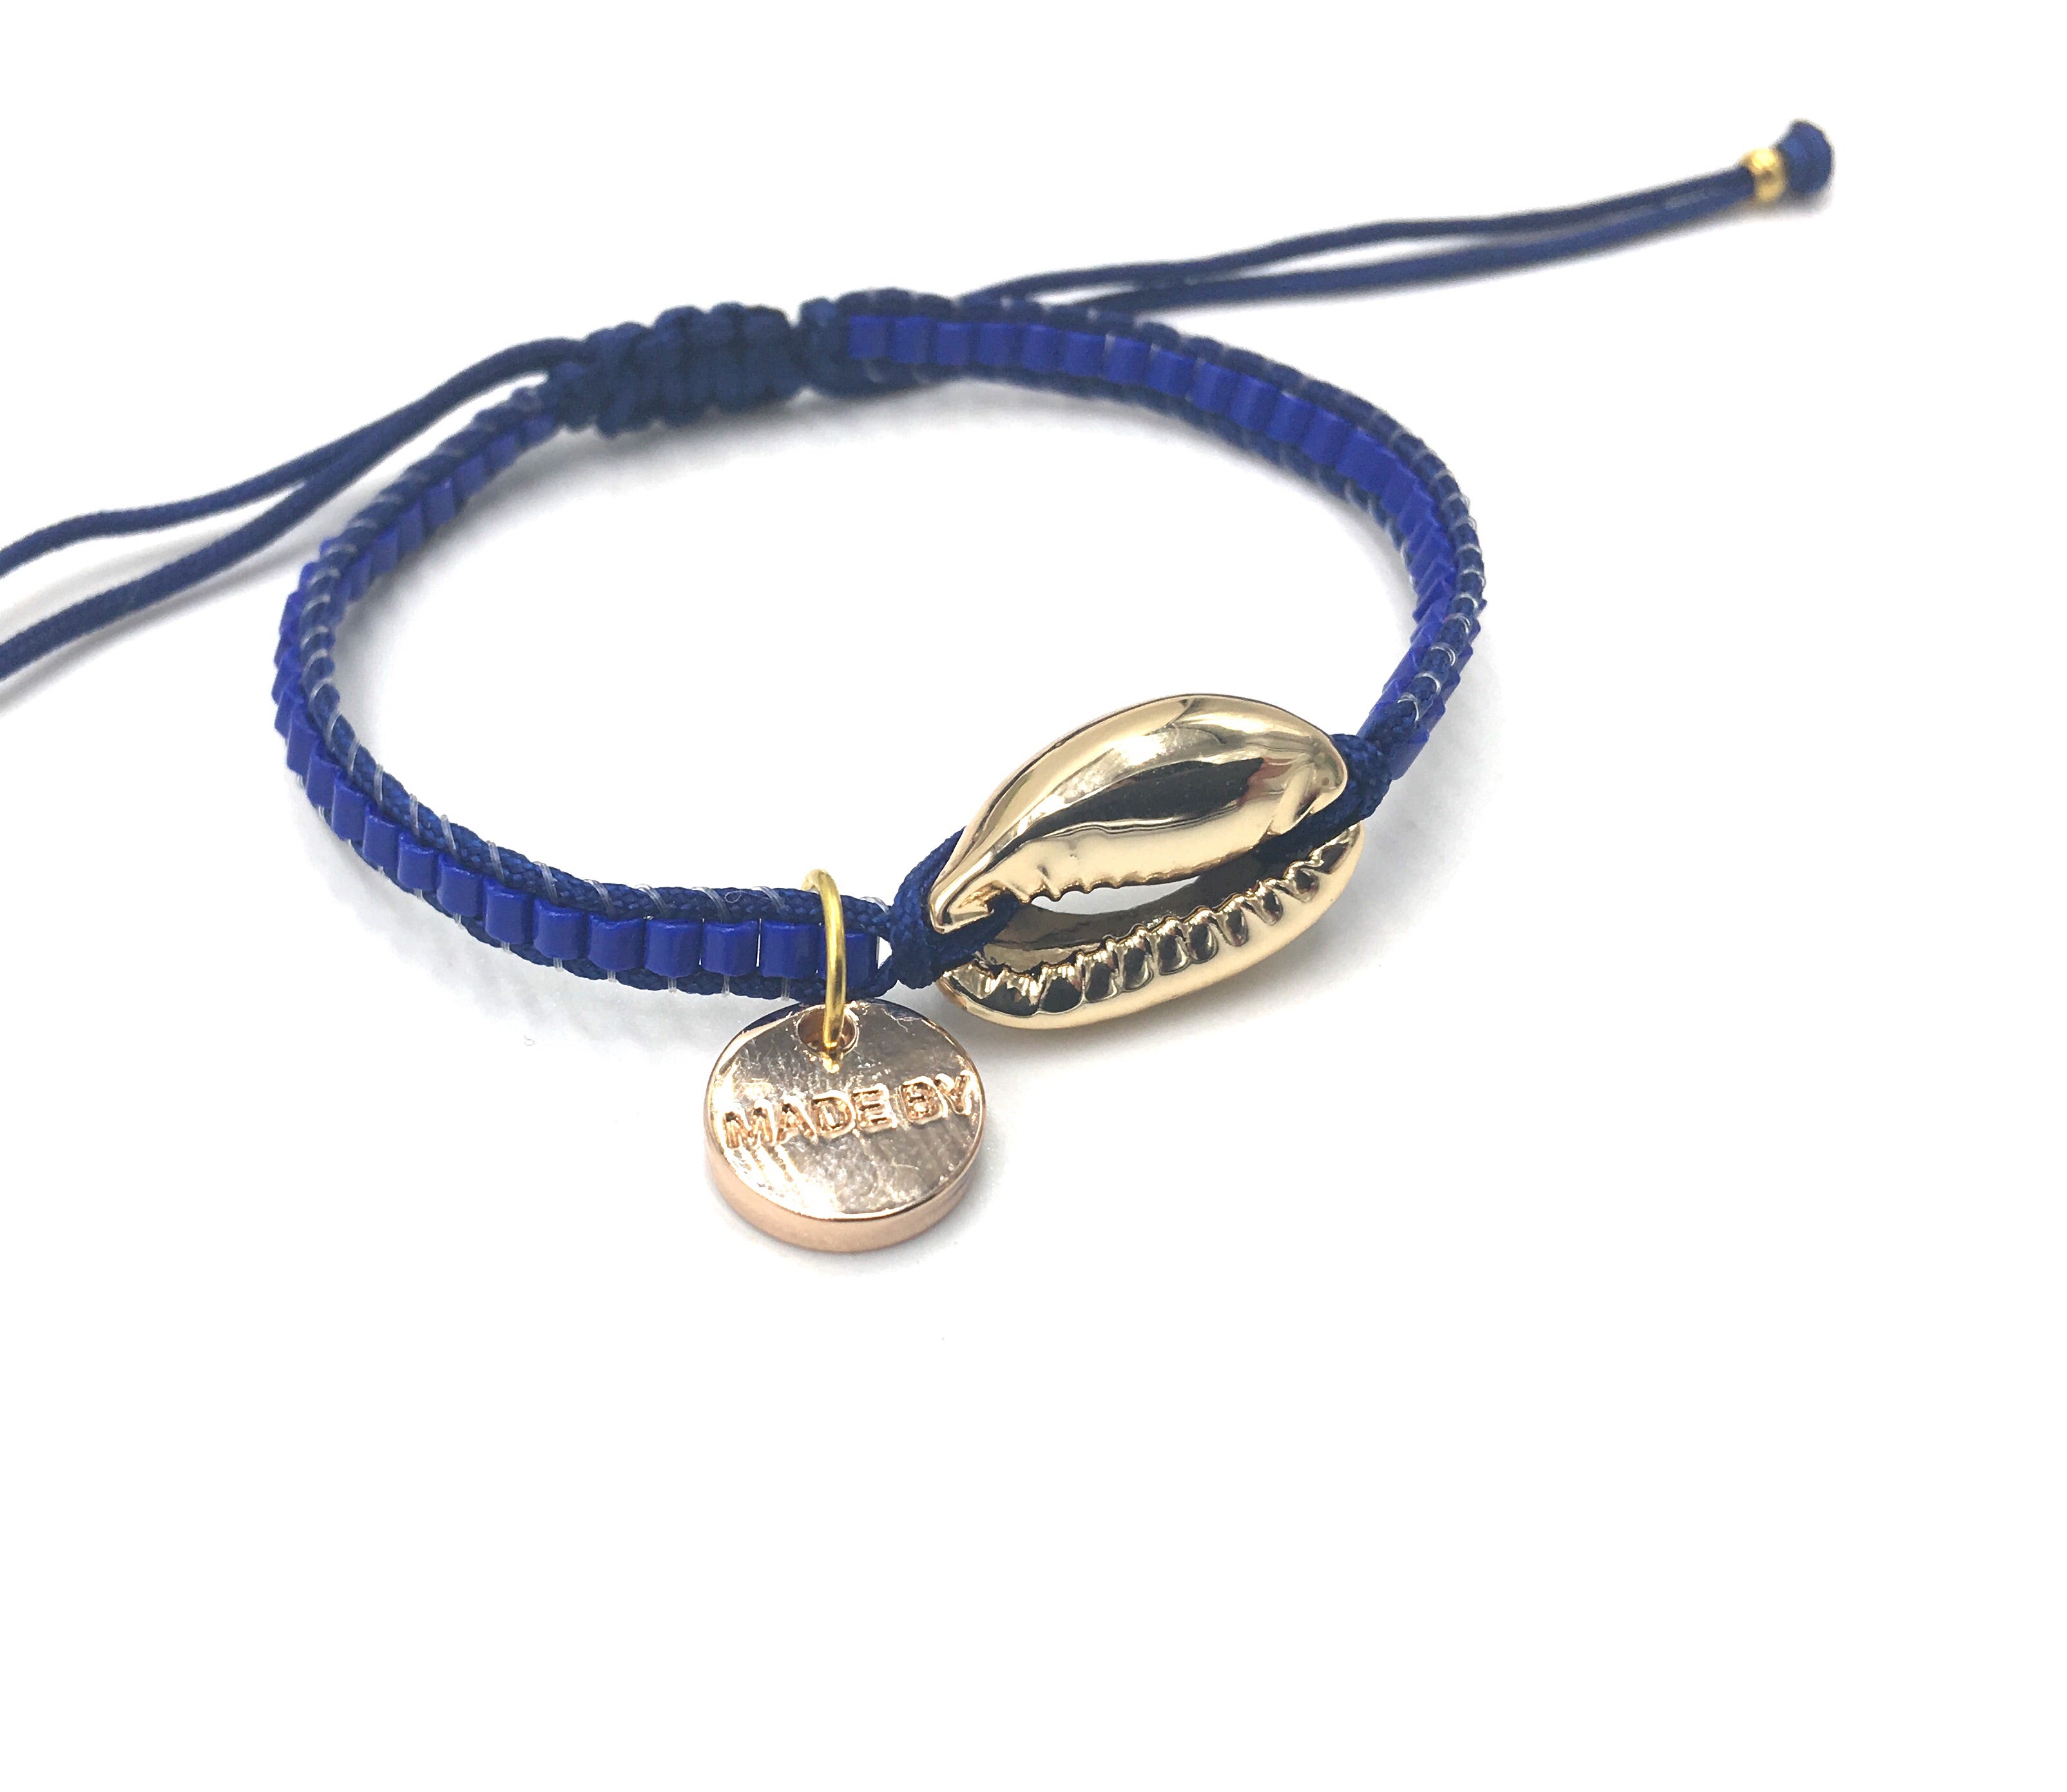 Gold Shell bracelet, mat blue seed beads and dark blue cord.